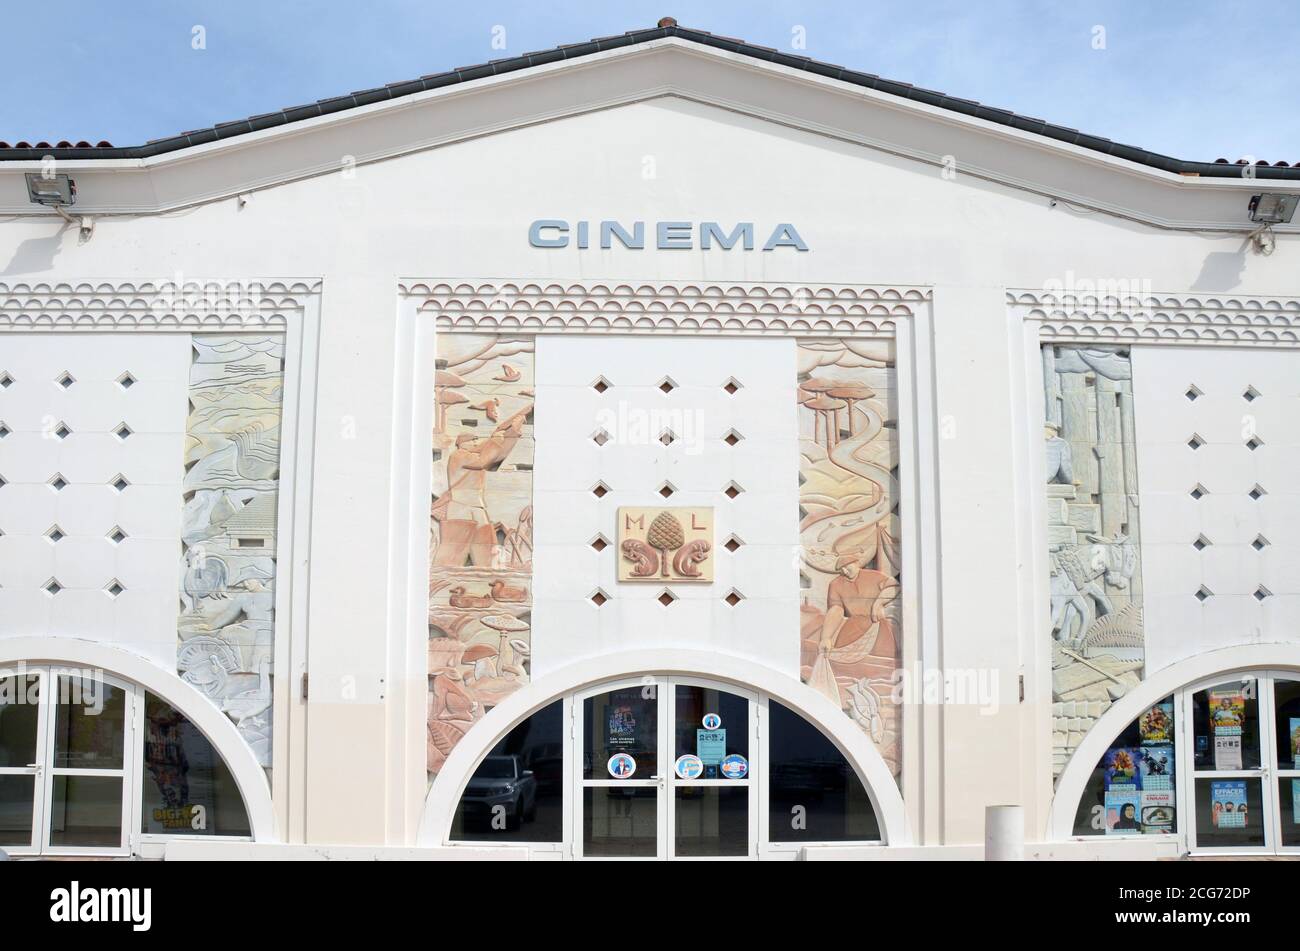 City of Morcenx, southwestern France, wirch is situated between Bordeaux and Bayonne. Here is the art deco cinema architecture. Stock Photo